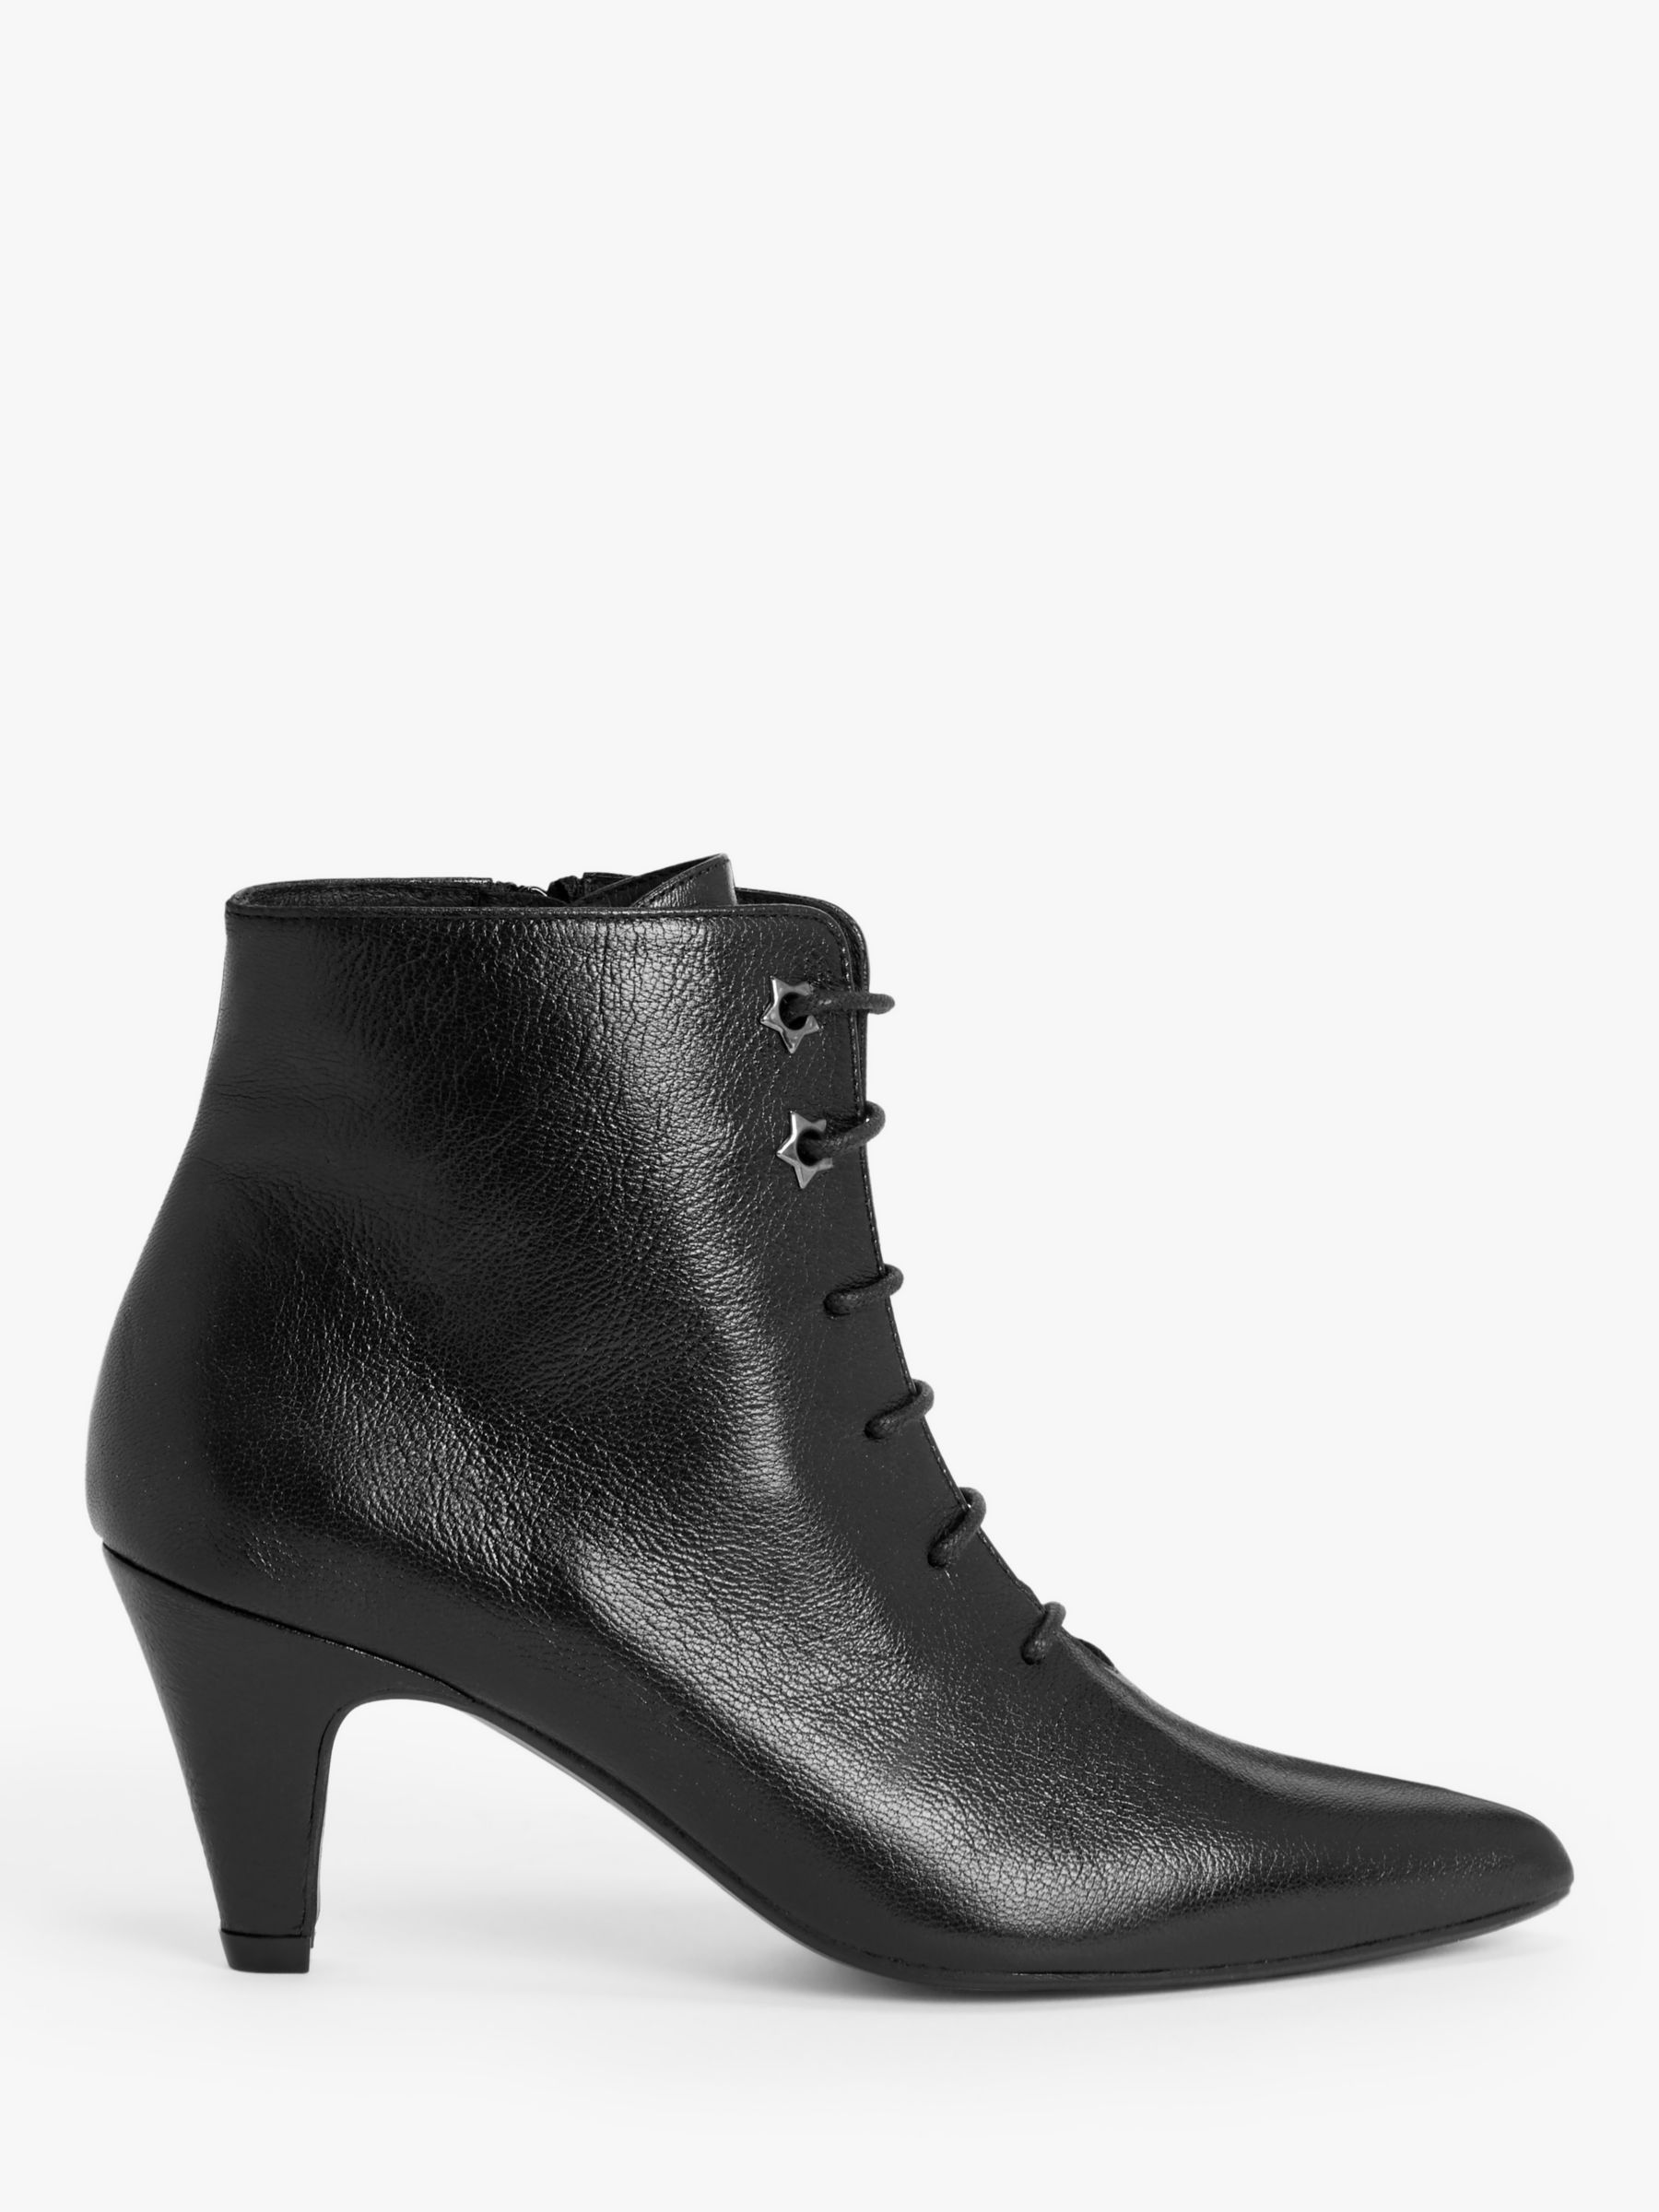 AND/OR Odelle Leather Lace Up Ankle Boots, Black at John Lewis & Partners